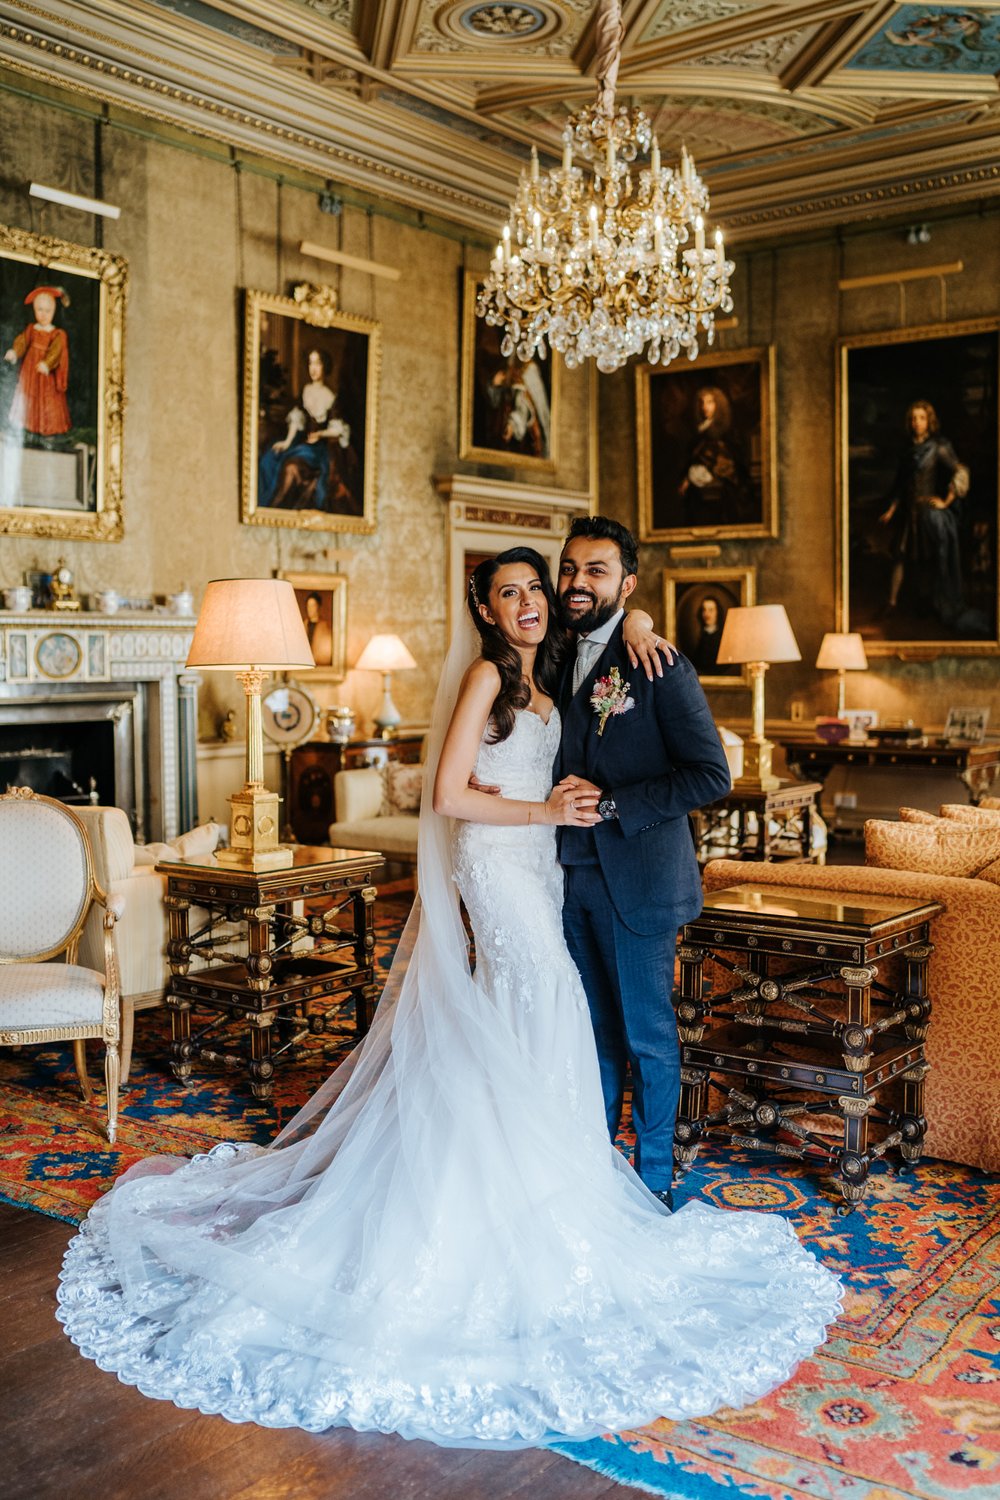 Bride, with carefully styled wedding dress, poses with groom in gorgeous, ornate room in Syon Park